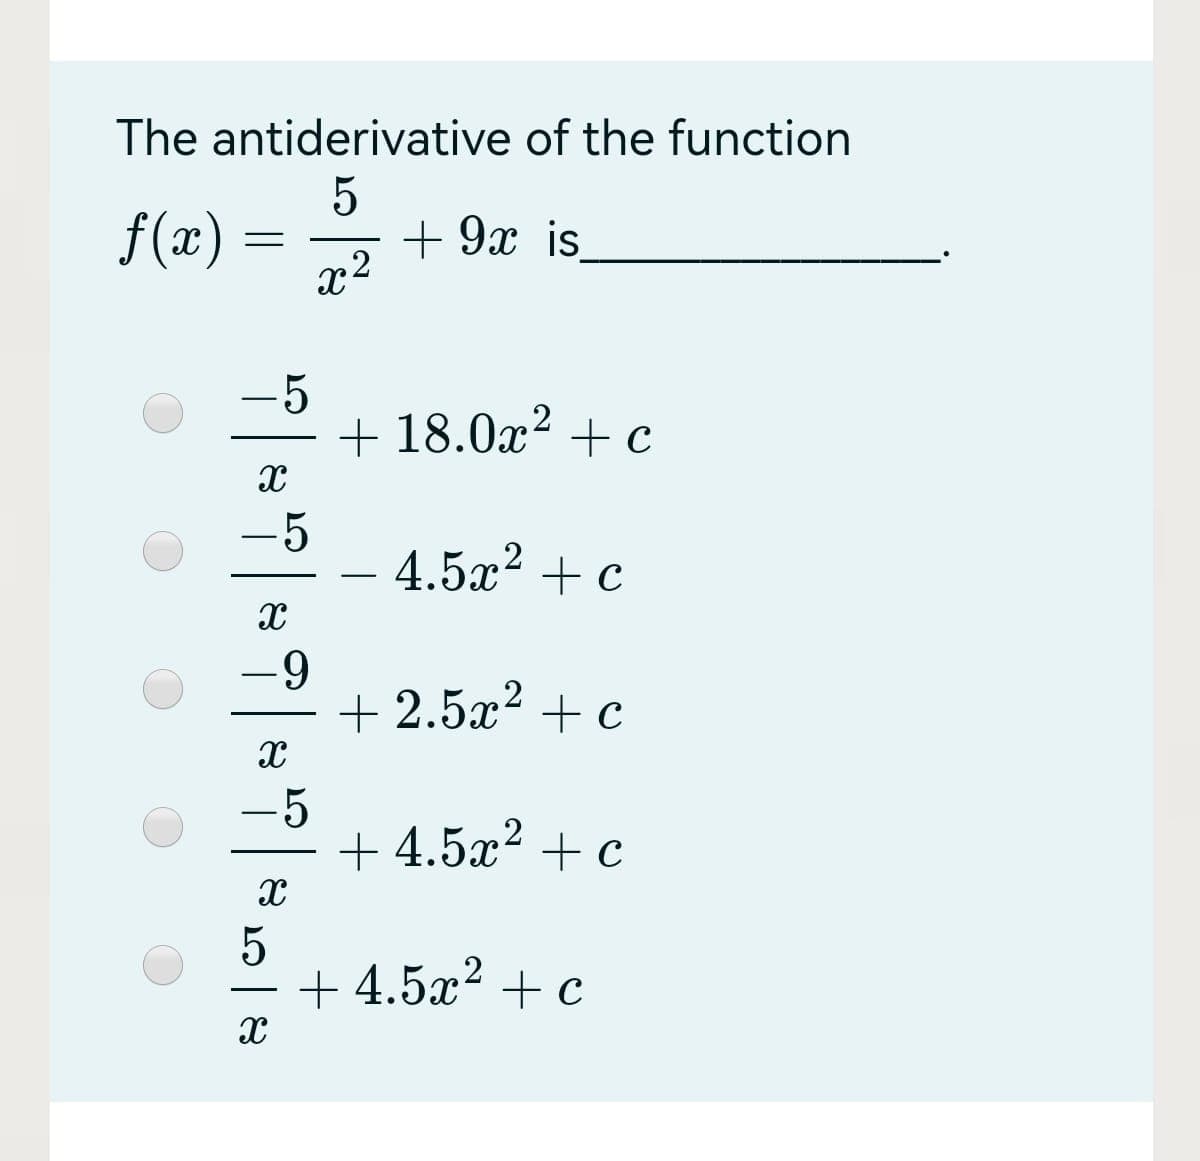 The antiderivative of the function
f(x)
x2
+ 9x is
-5
+ 18.0x² + c
-5
4.5x? +c
-9
+ 2.5x2 + c
-5
+ 4.5x? + c
+ 4.5x2 + c
-
